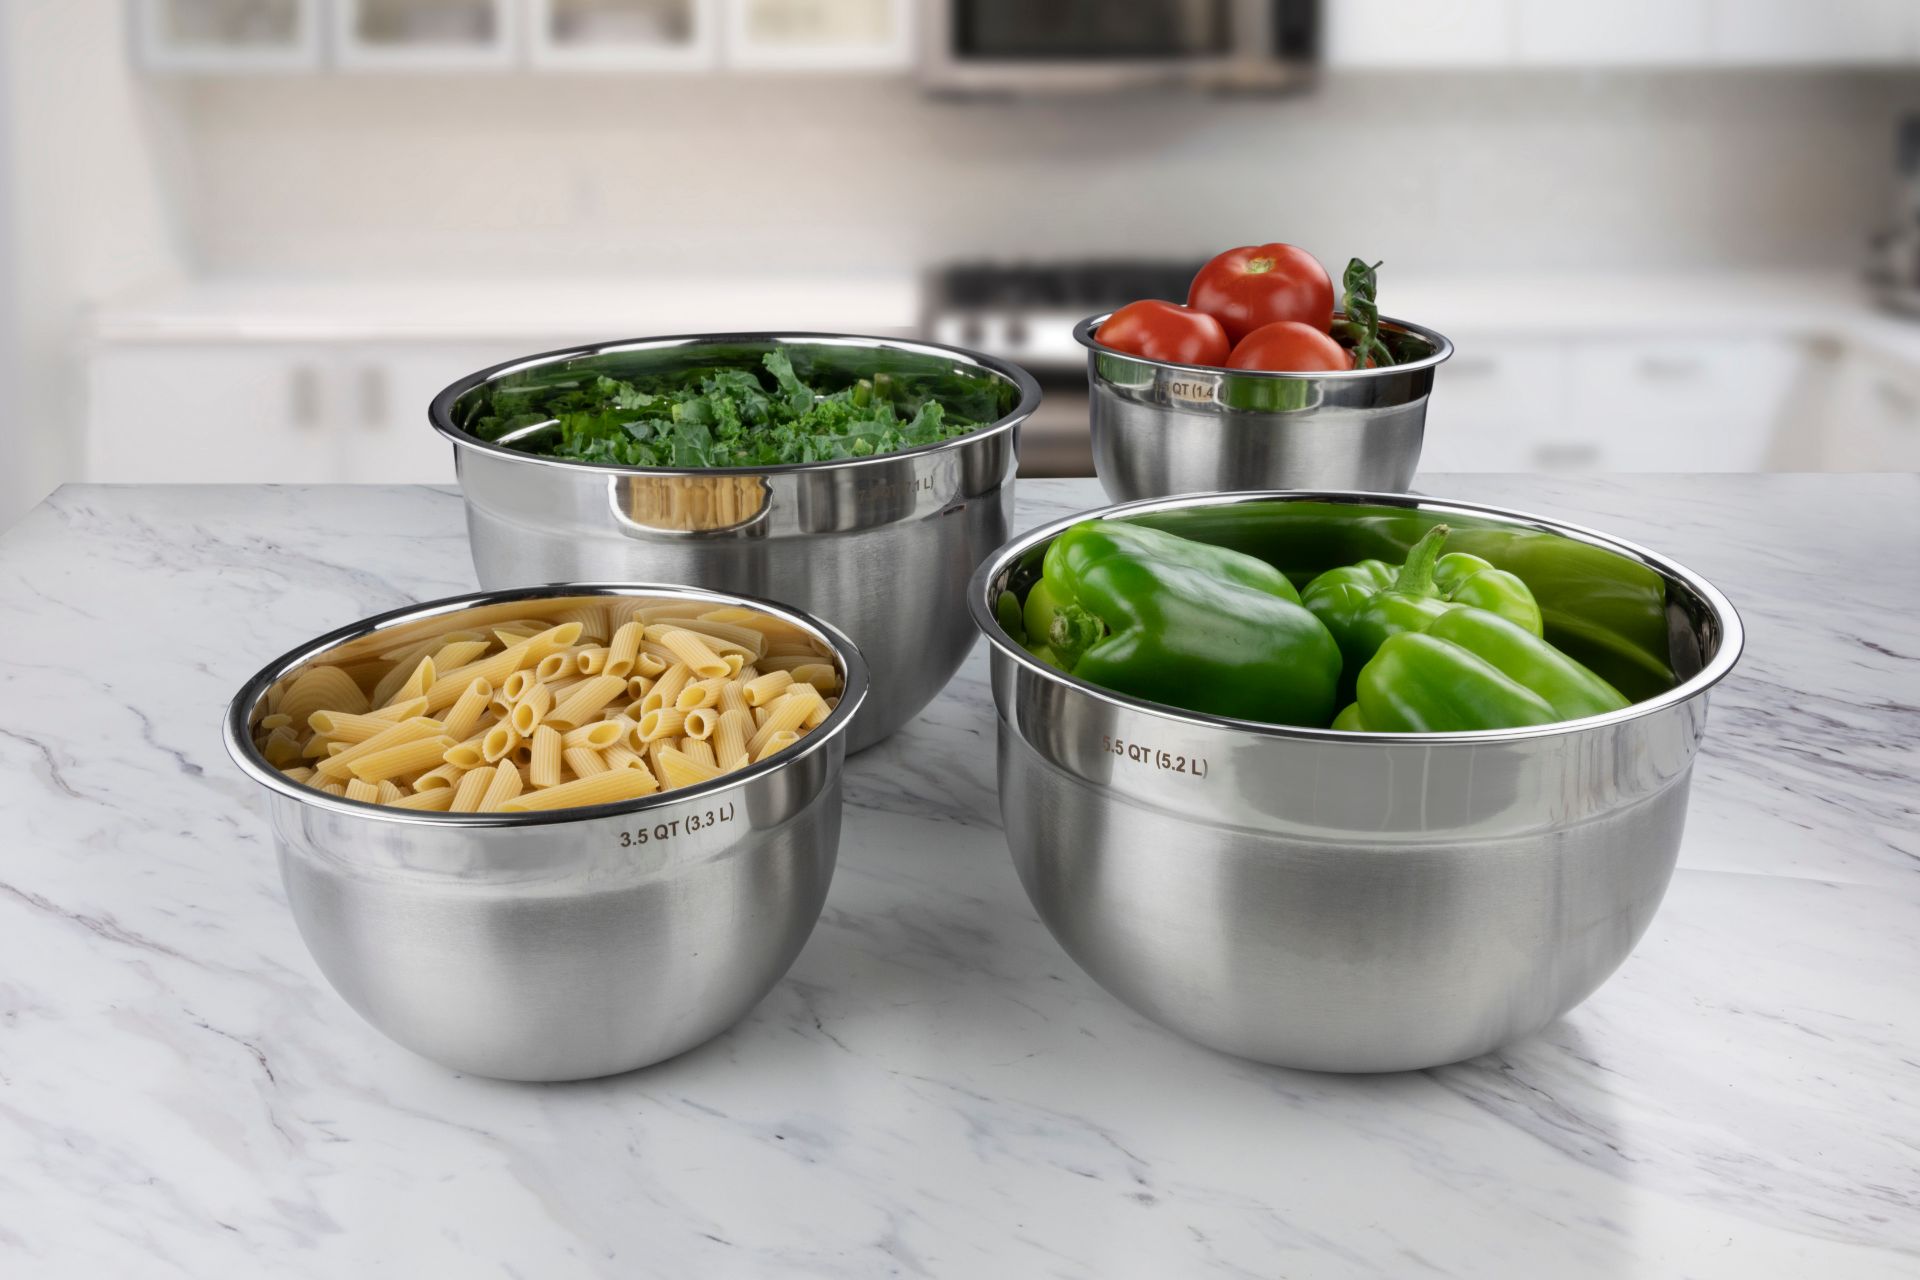 Picture for category Mixing Bowls